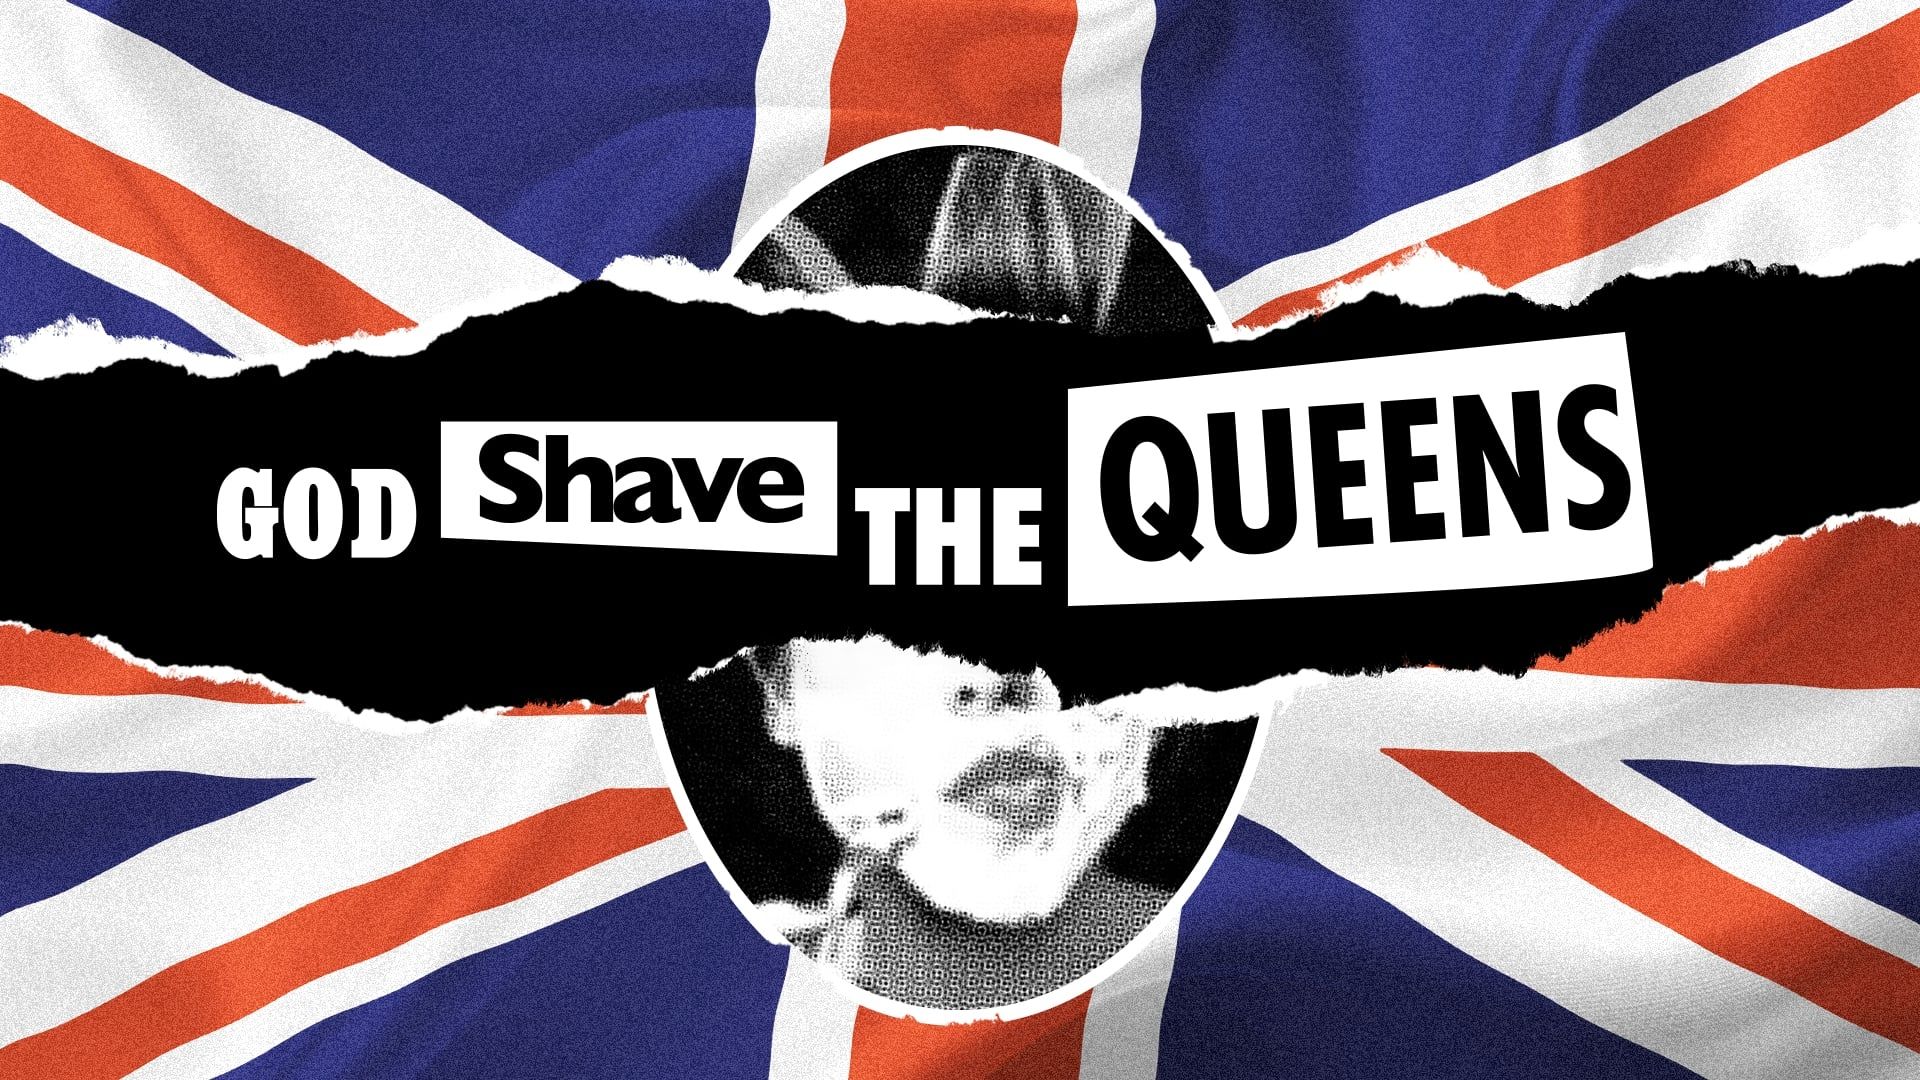 God Shave the Queens background